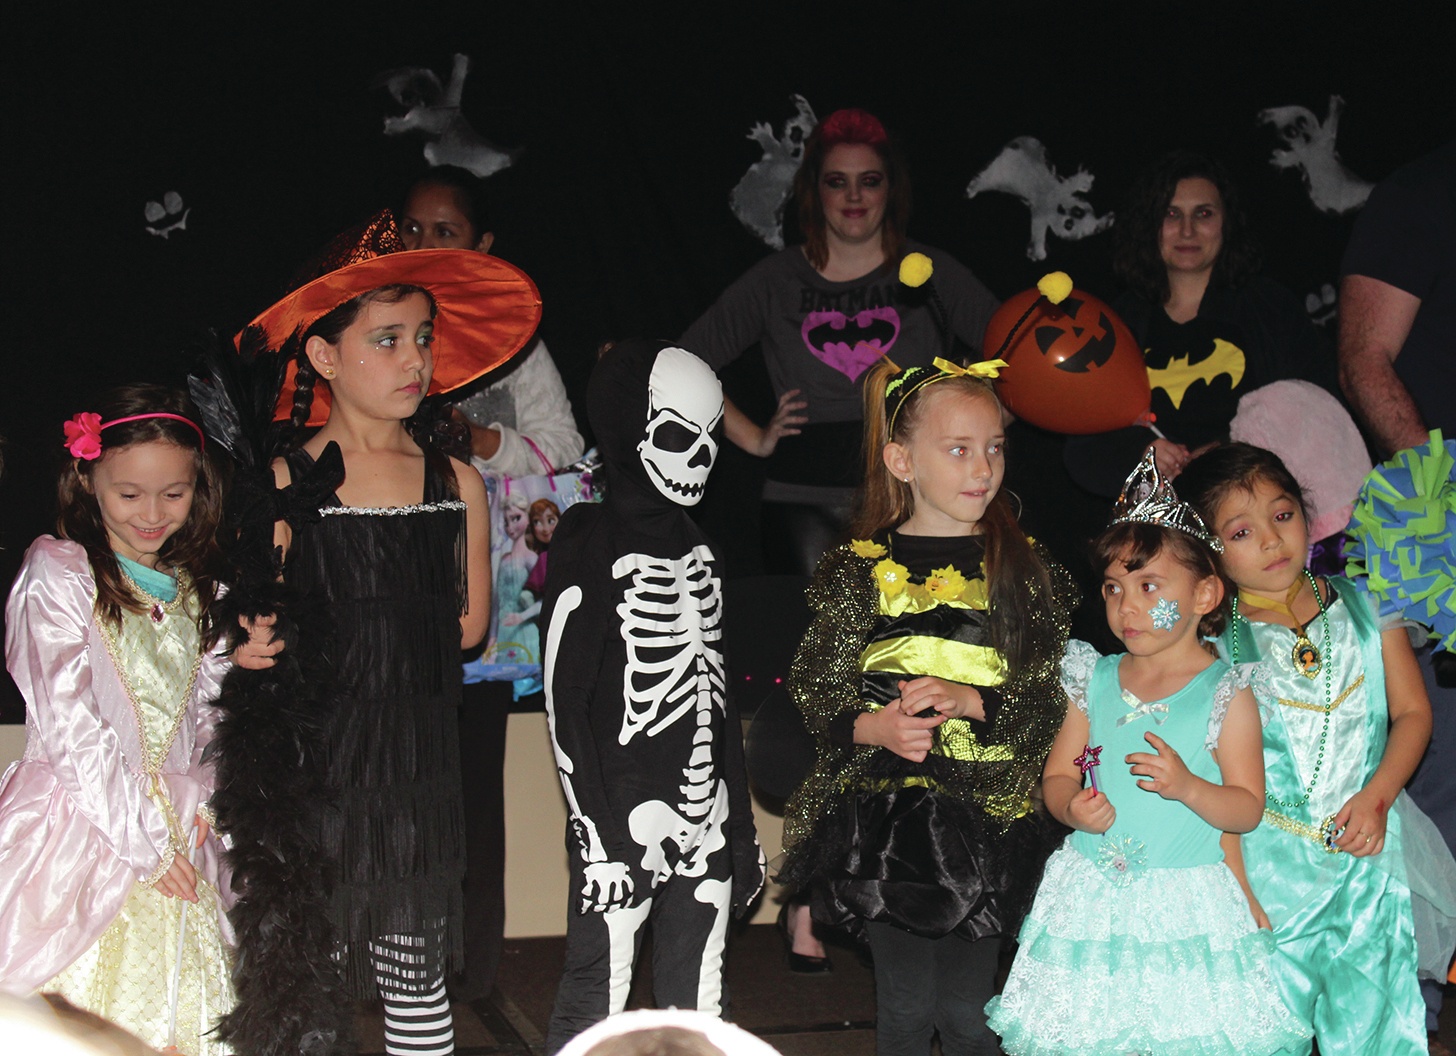 North Coast News: Children participate in the costume contest during the Halloween party sponsored by the Ocean Shores Firefighters Association at the Ocean Shores Convention Center.